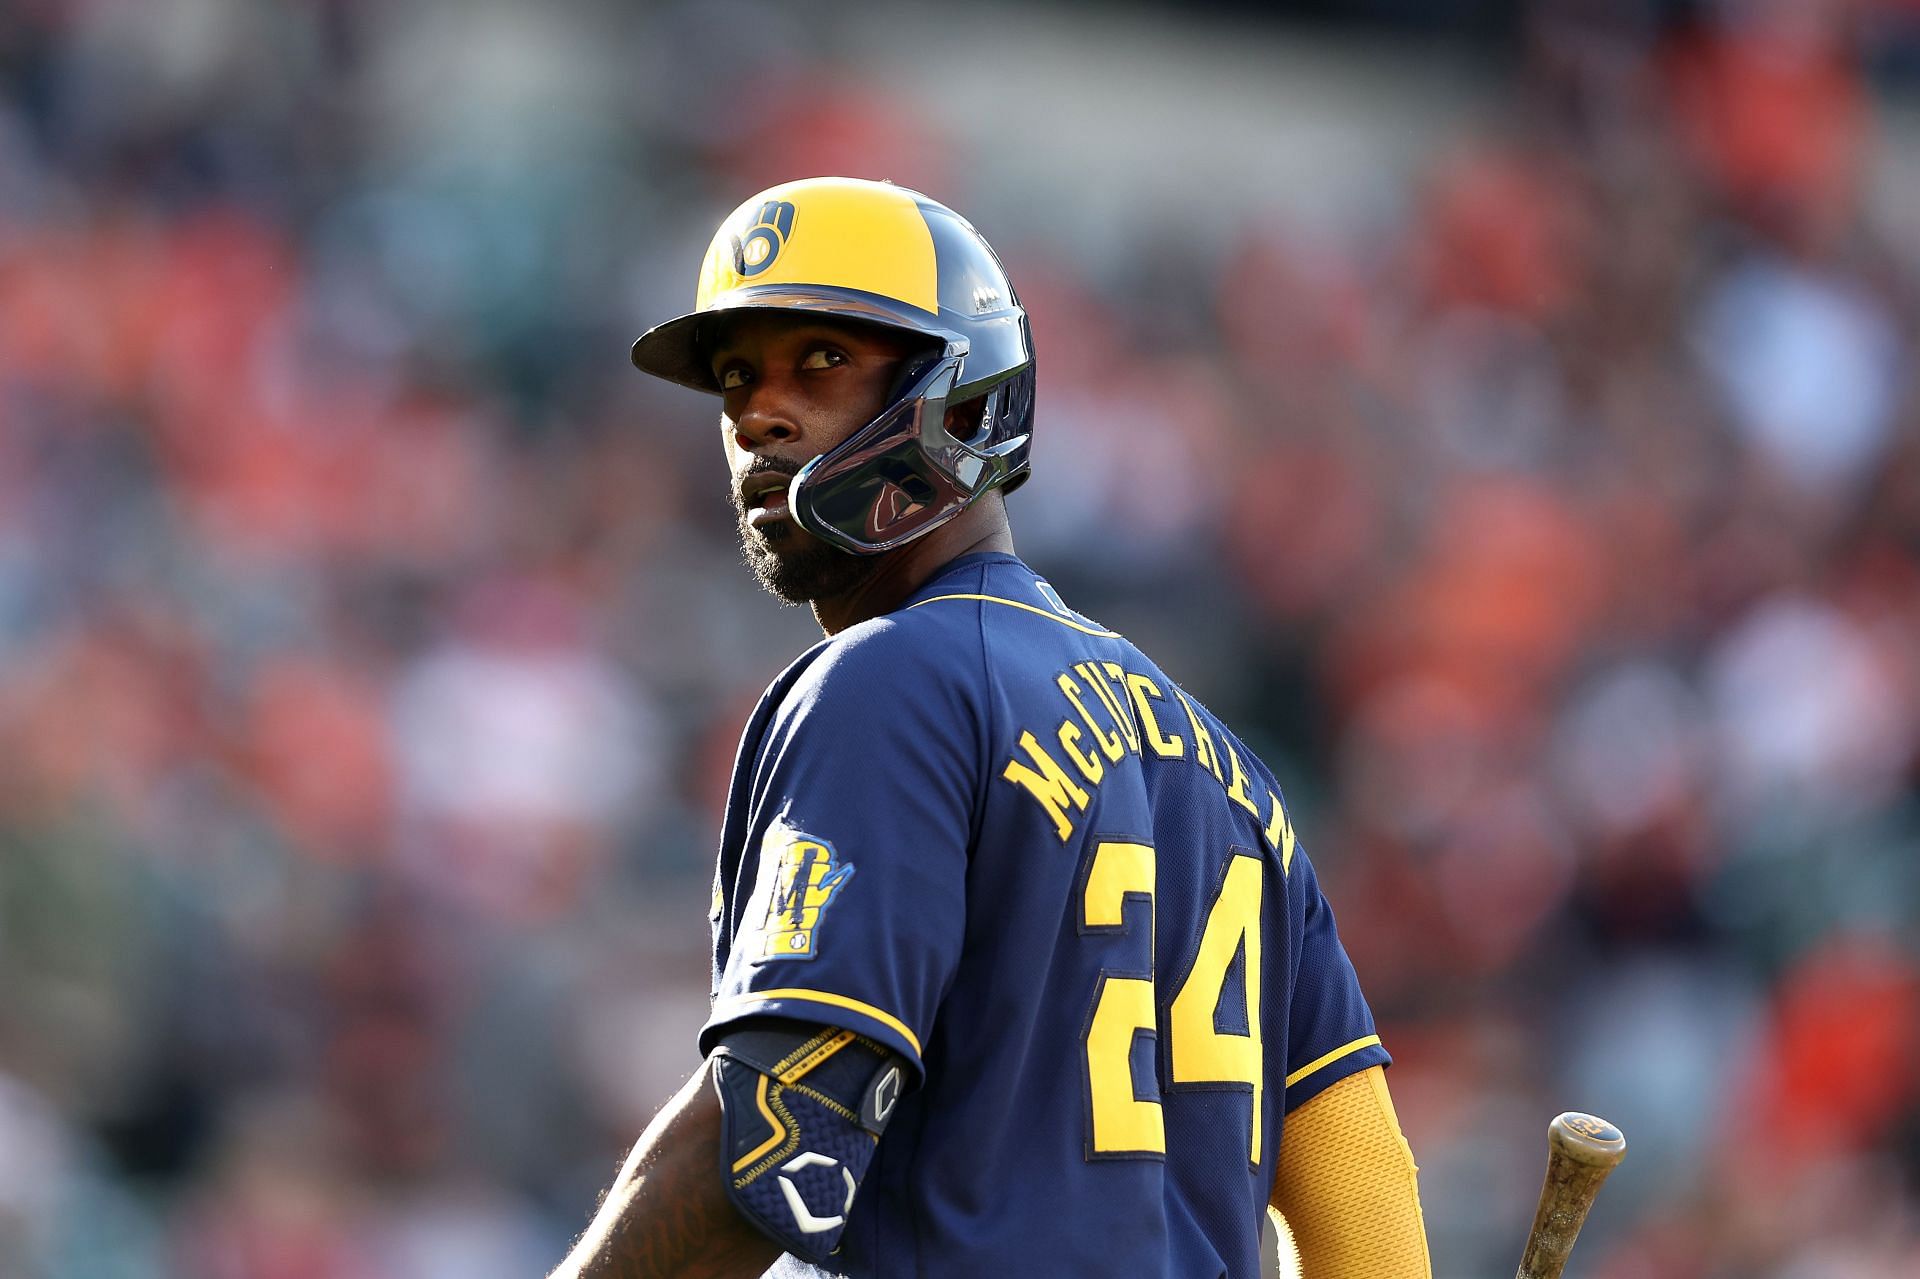 McCutchen nearing return from IL, Adames may trade places - Brew Crew Ball